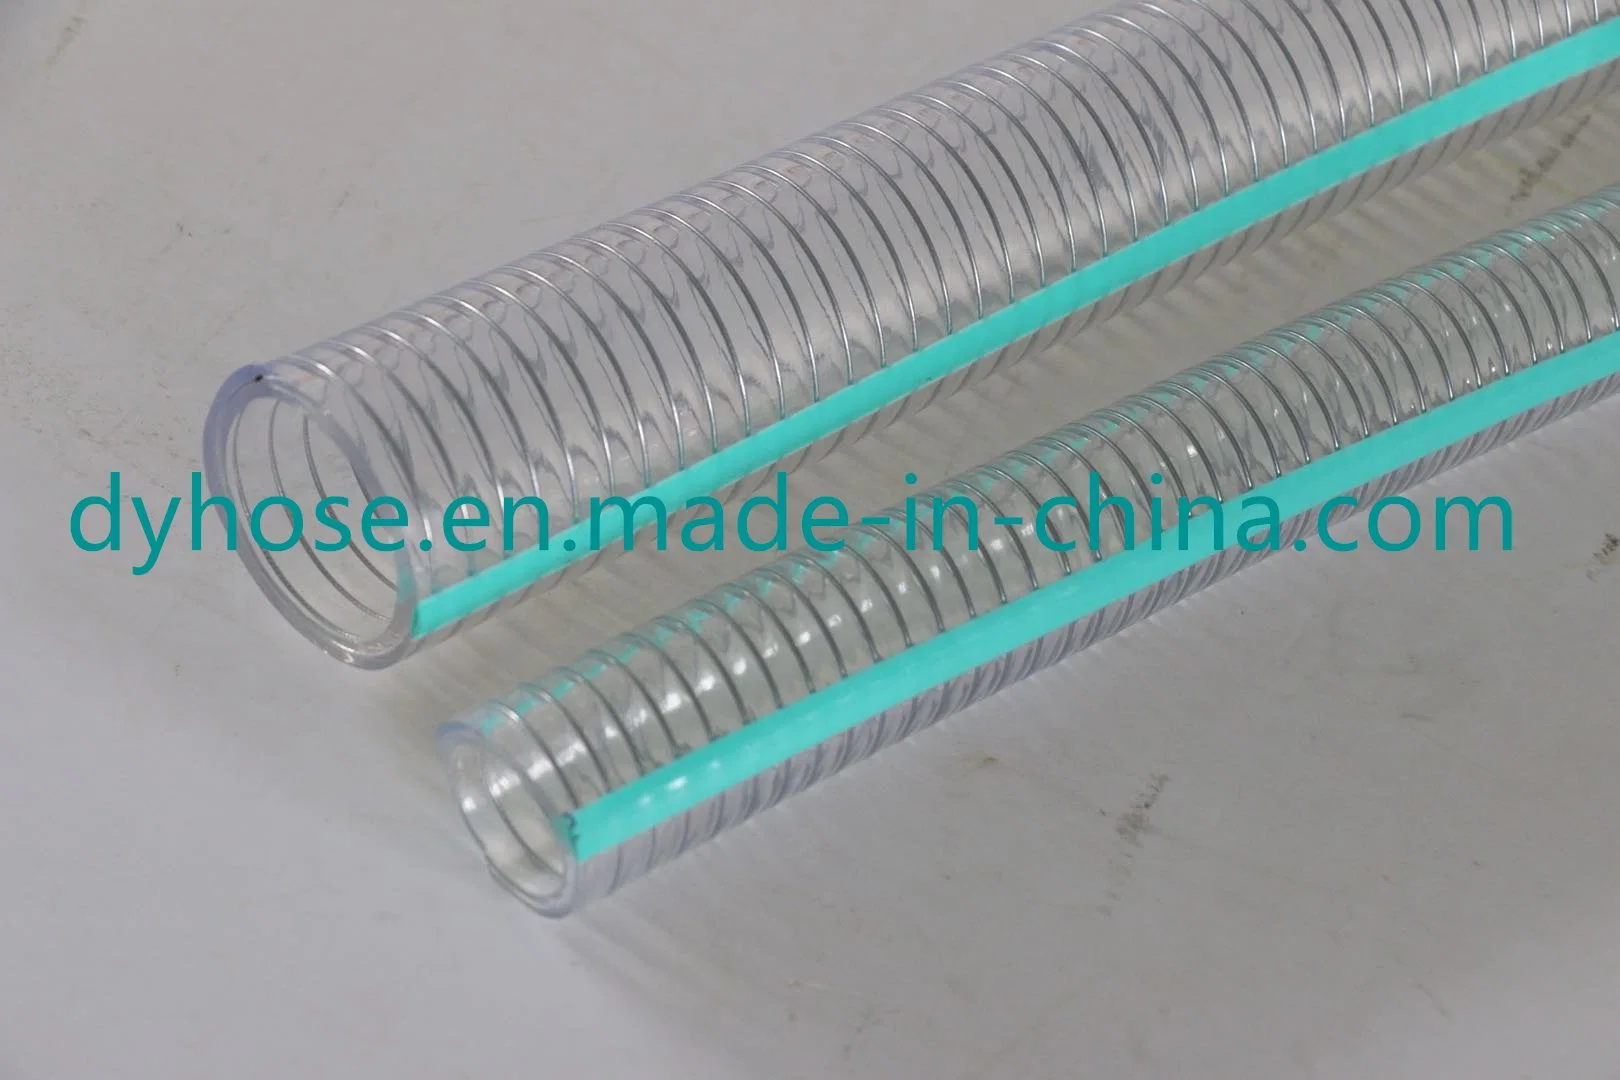 High Quality PVC Spiral Spring Reinforced Transparent Hose Agricultural Irrigation Pipe PVC Steel Wire Reinforced Hose